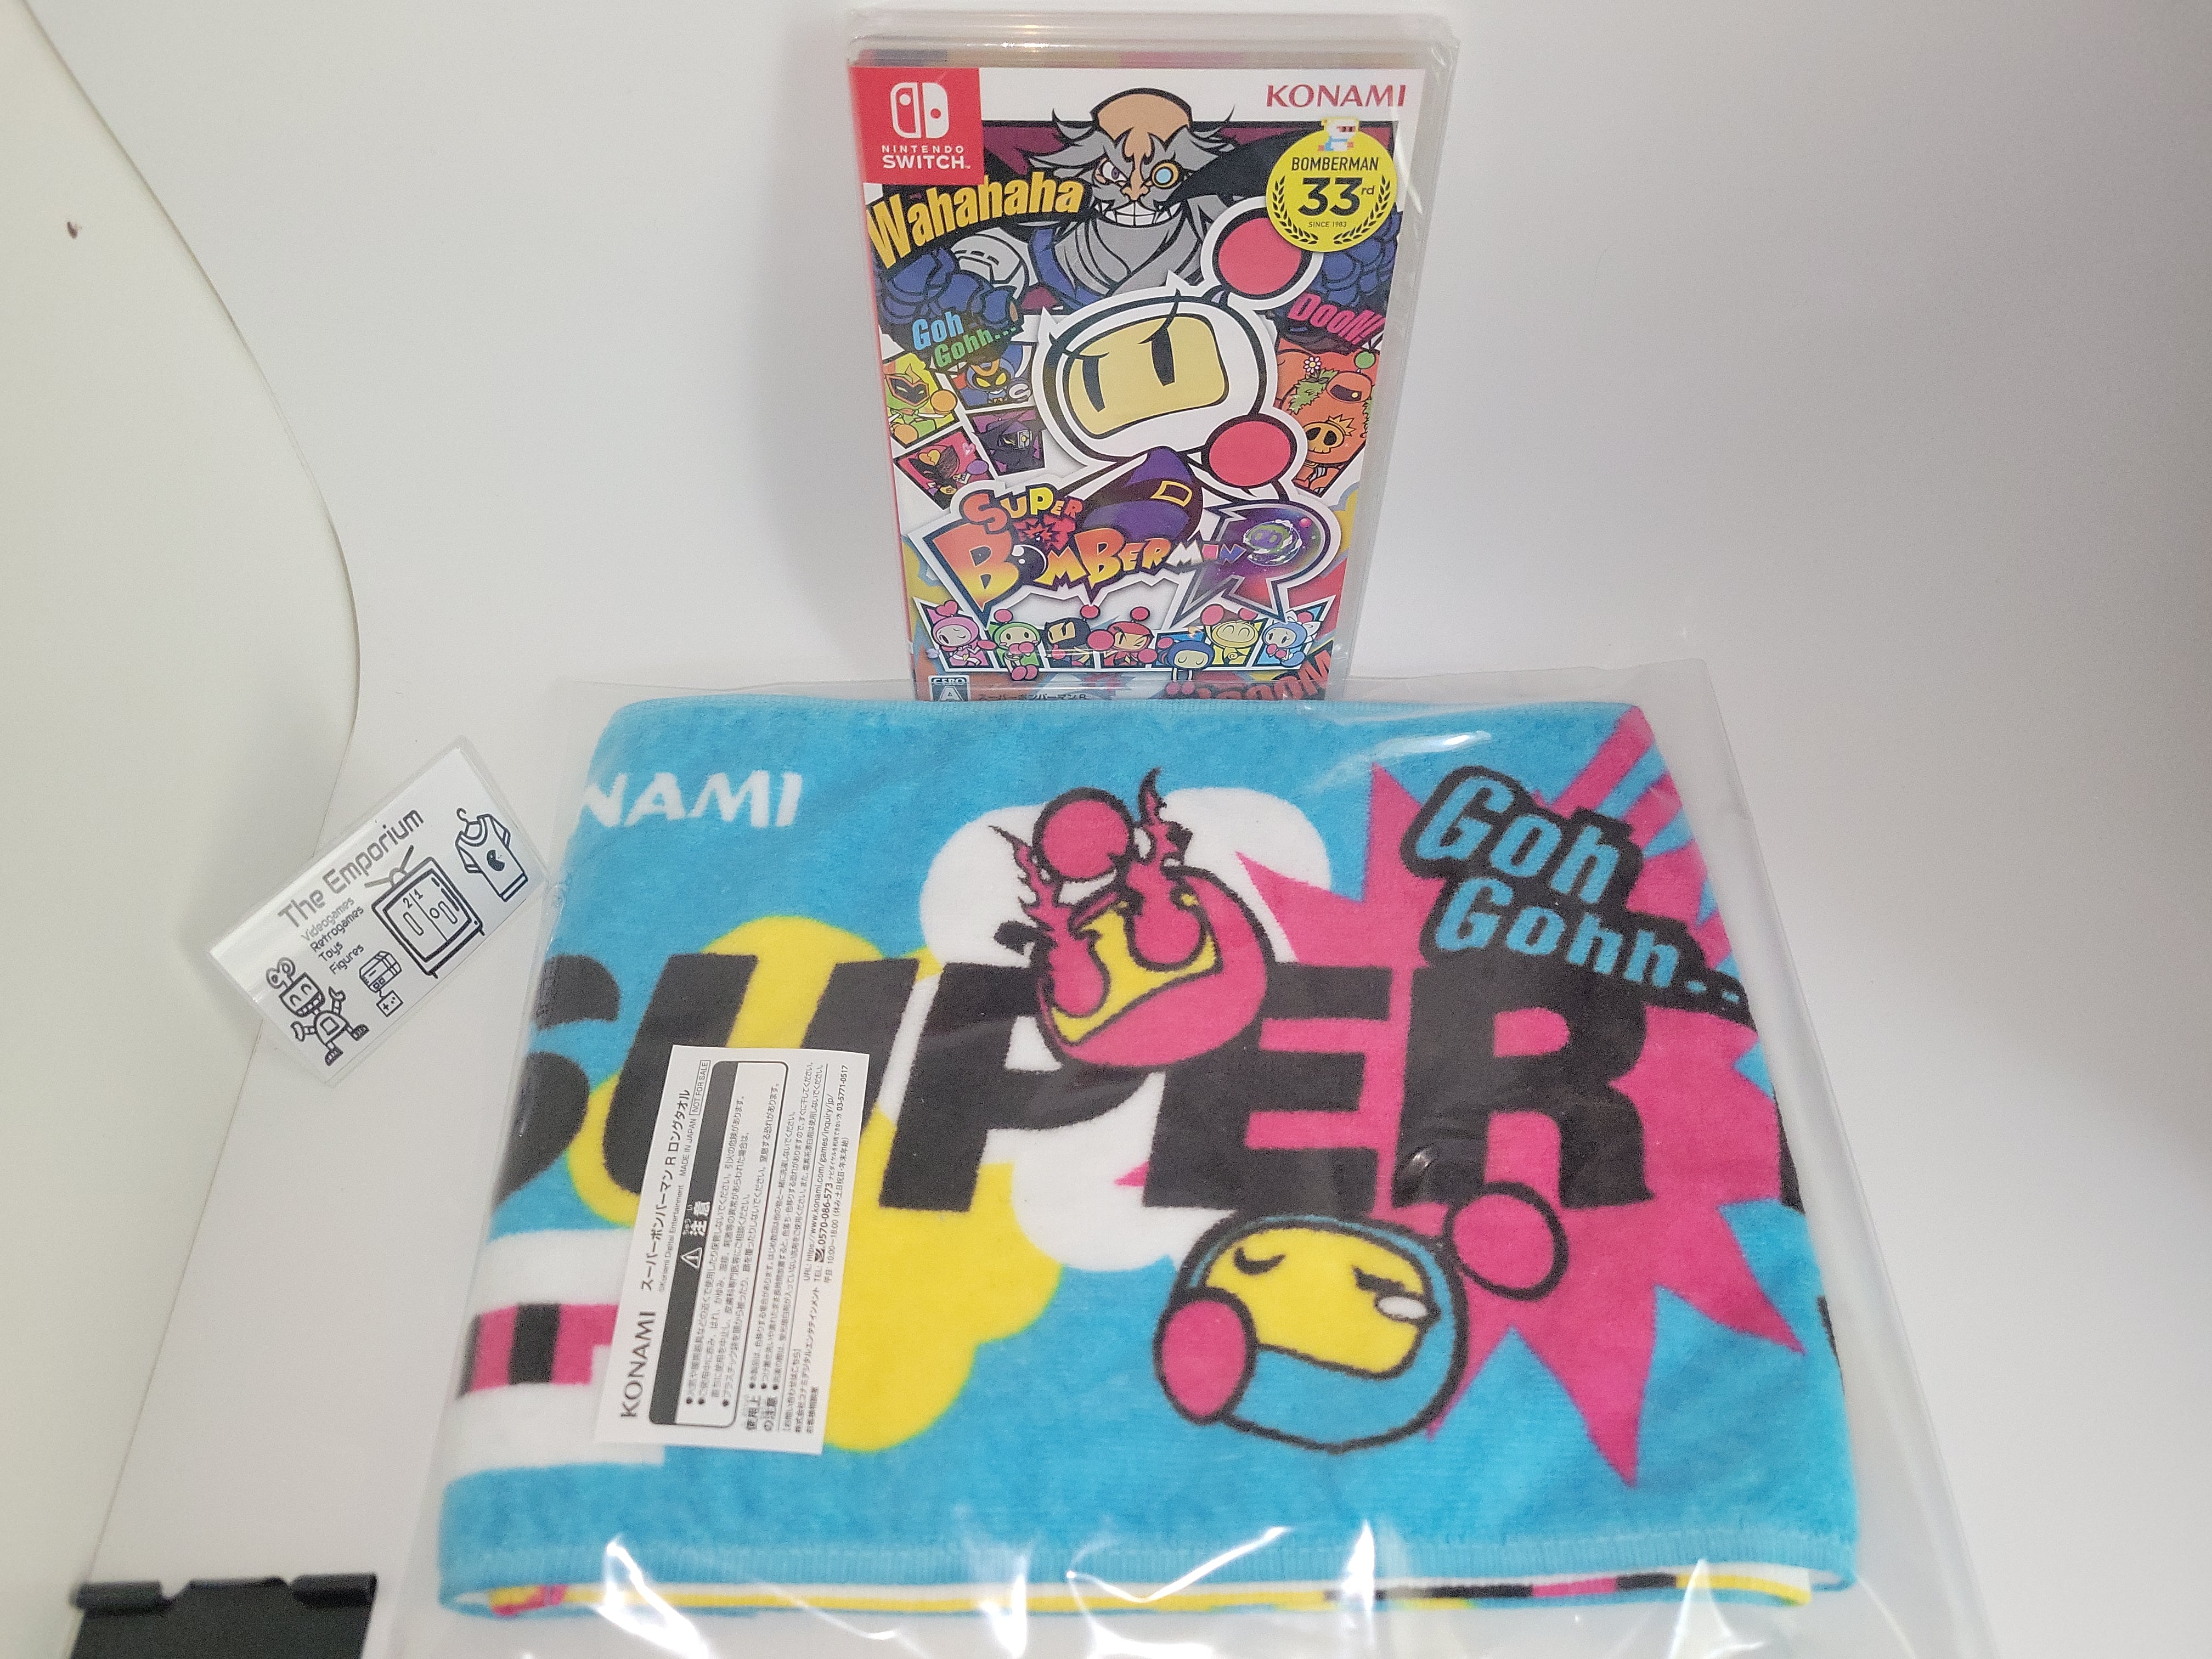 with - Konami R Towel Nintendo Emporium The Super Limited Preorder RetroGames and Switch Toys – Bomberman